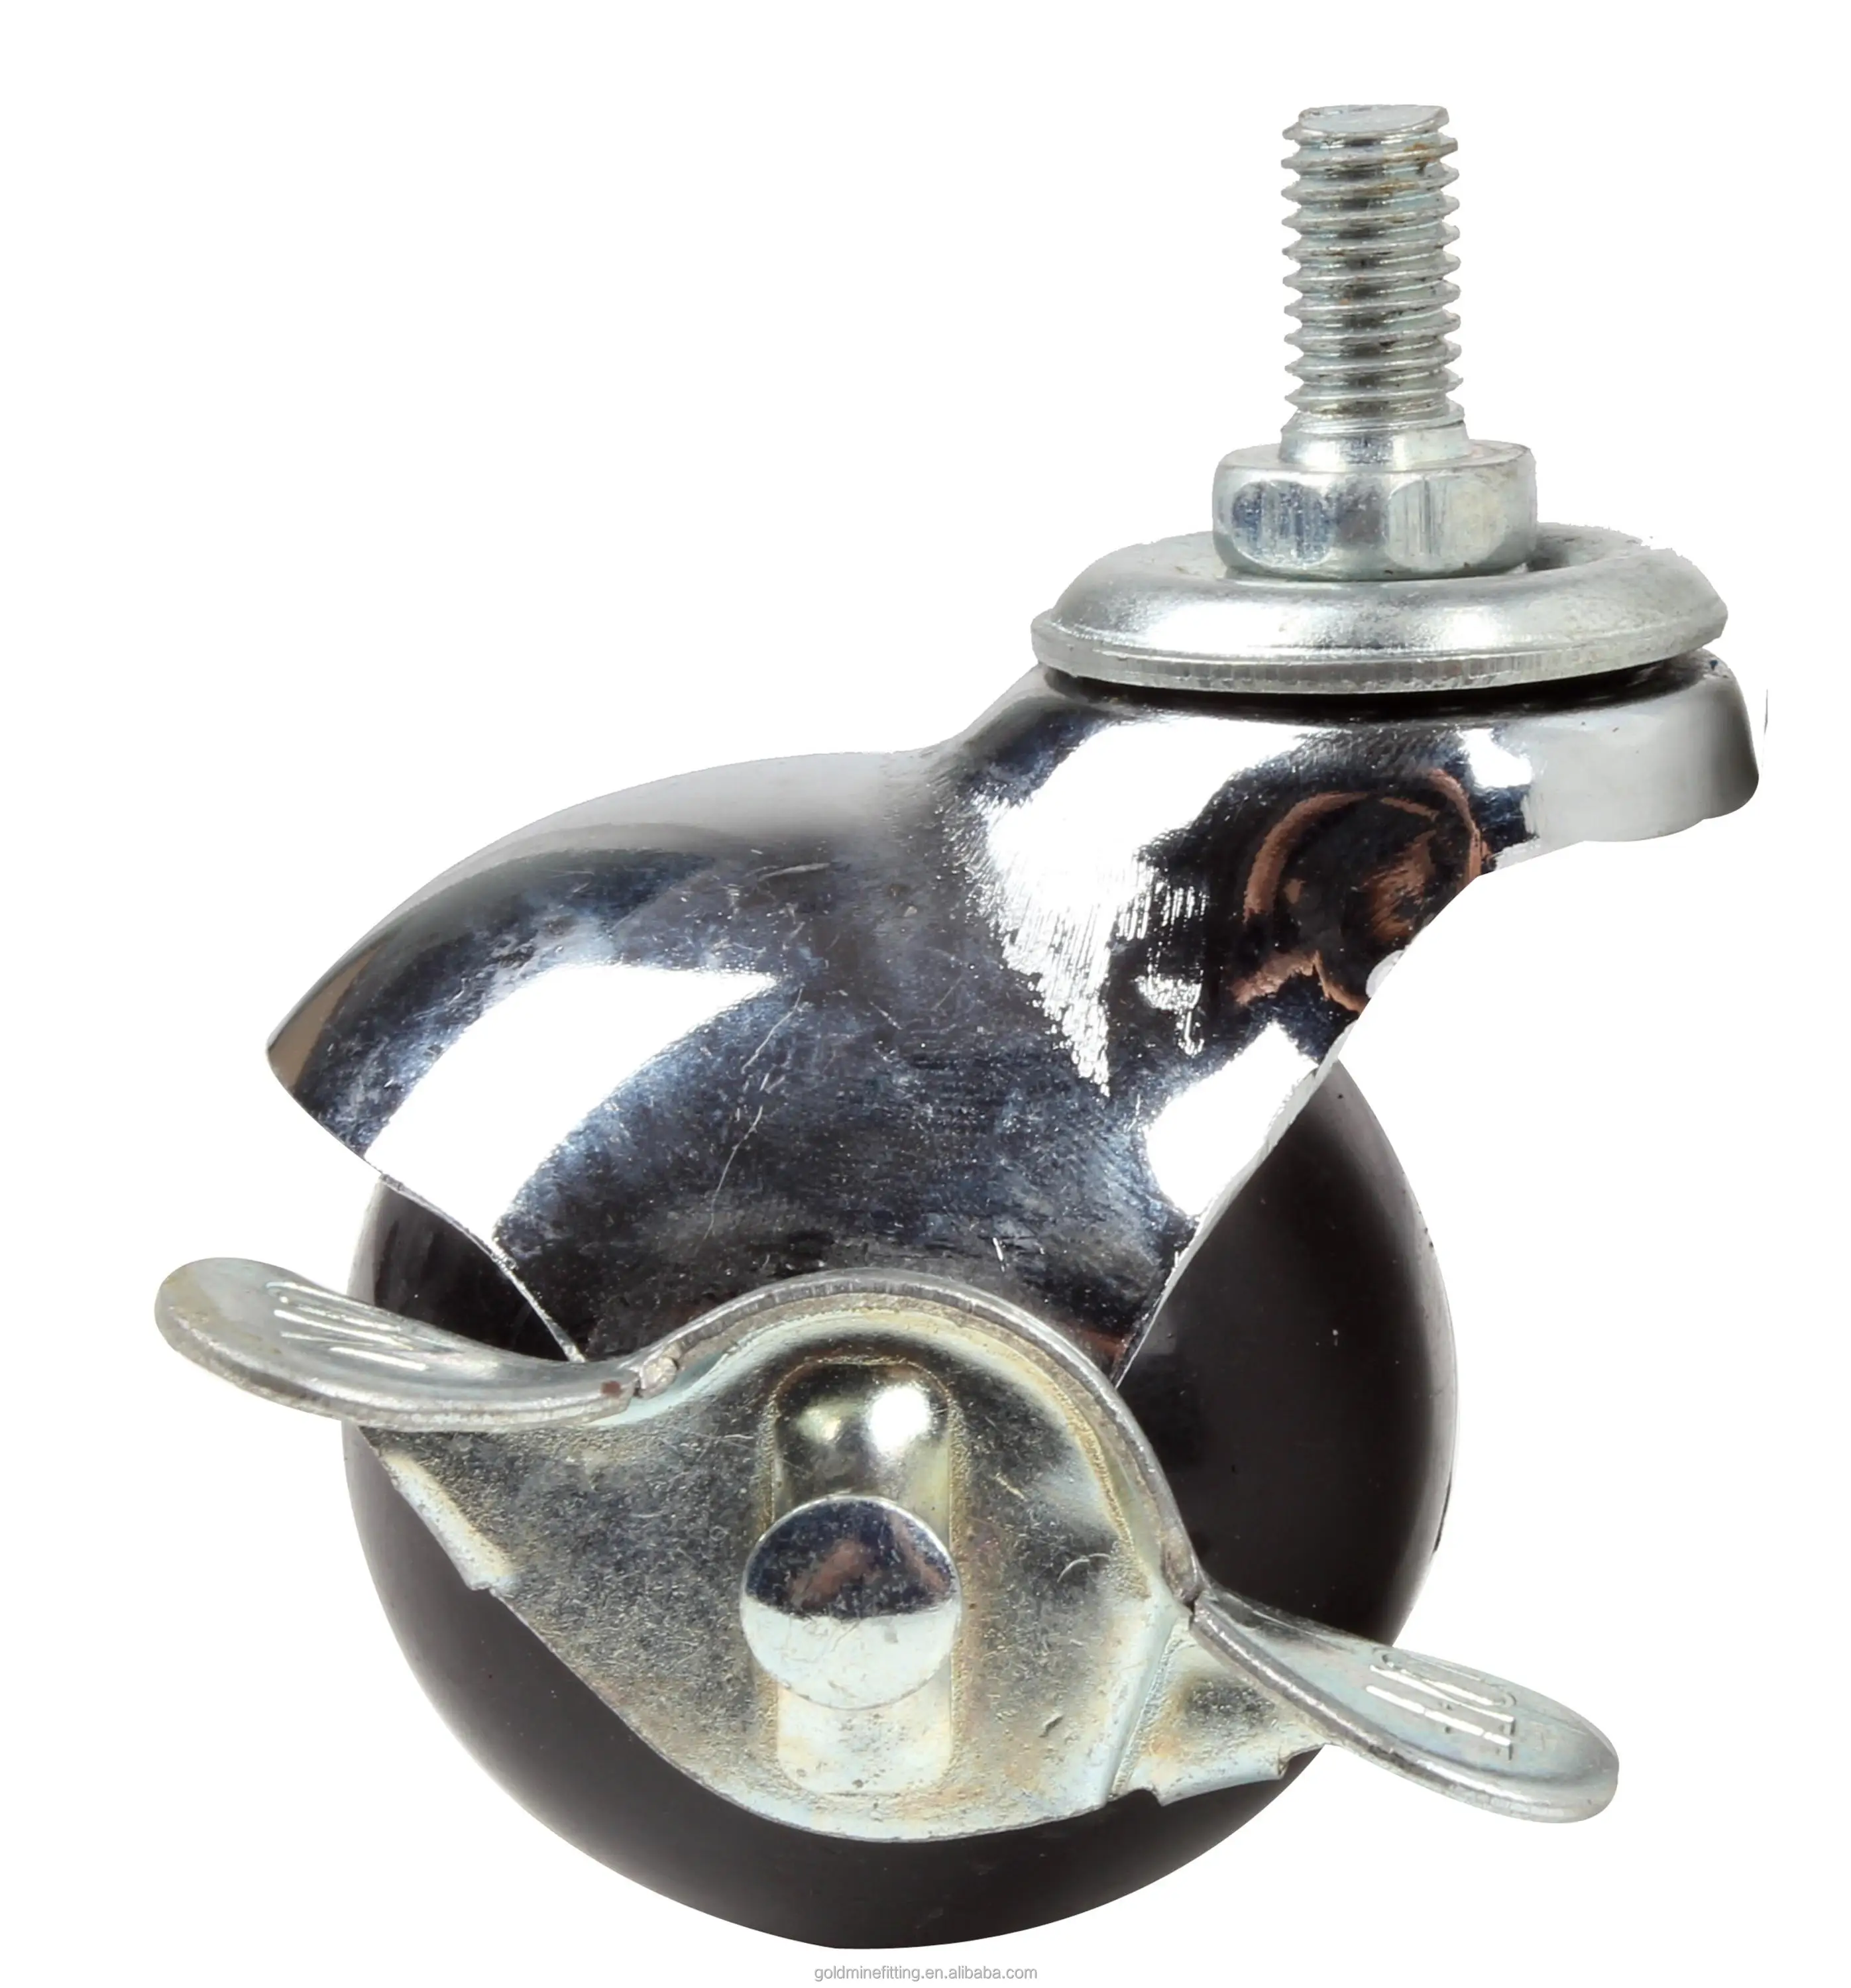 China Ball Casters China Ball Casters Manufacturers and Suppliers